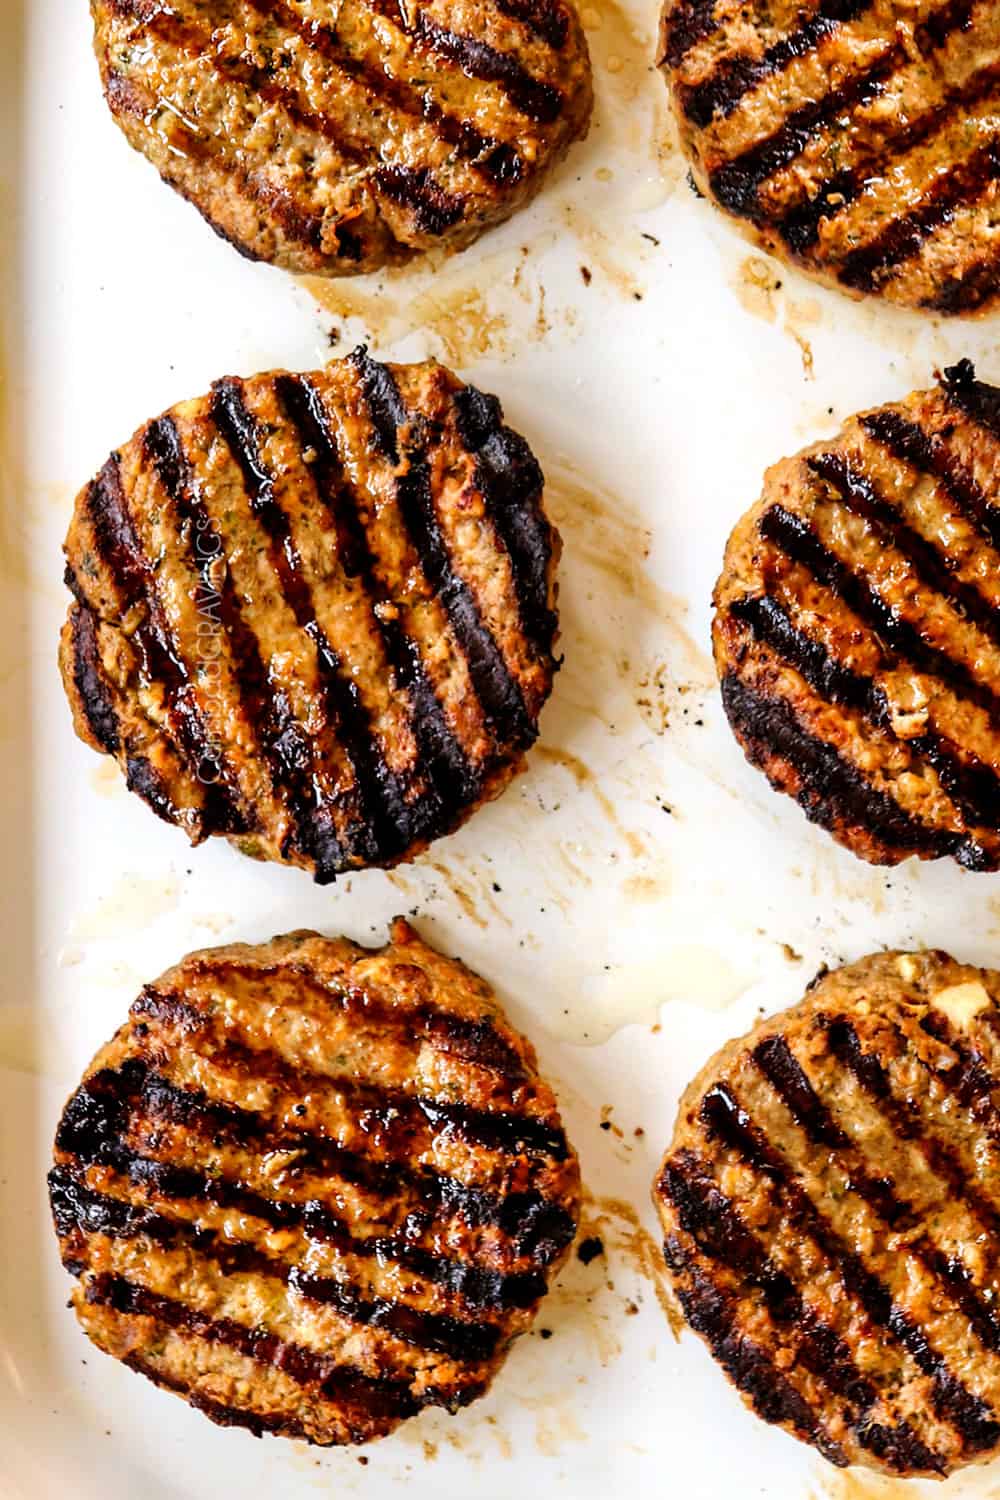 showing how to make Greek burgers with lamb by grilling until there are dark grill marks